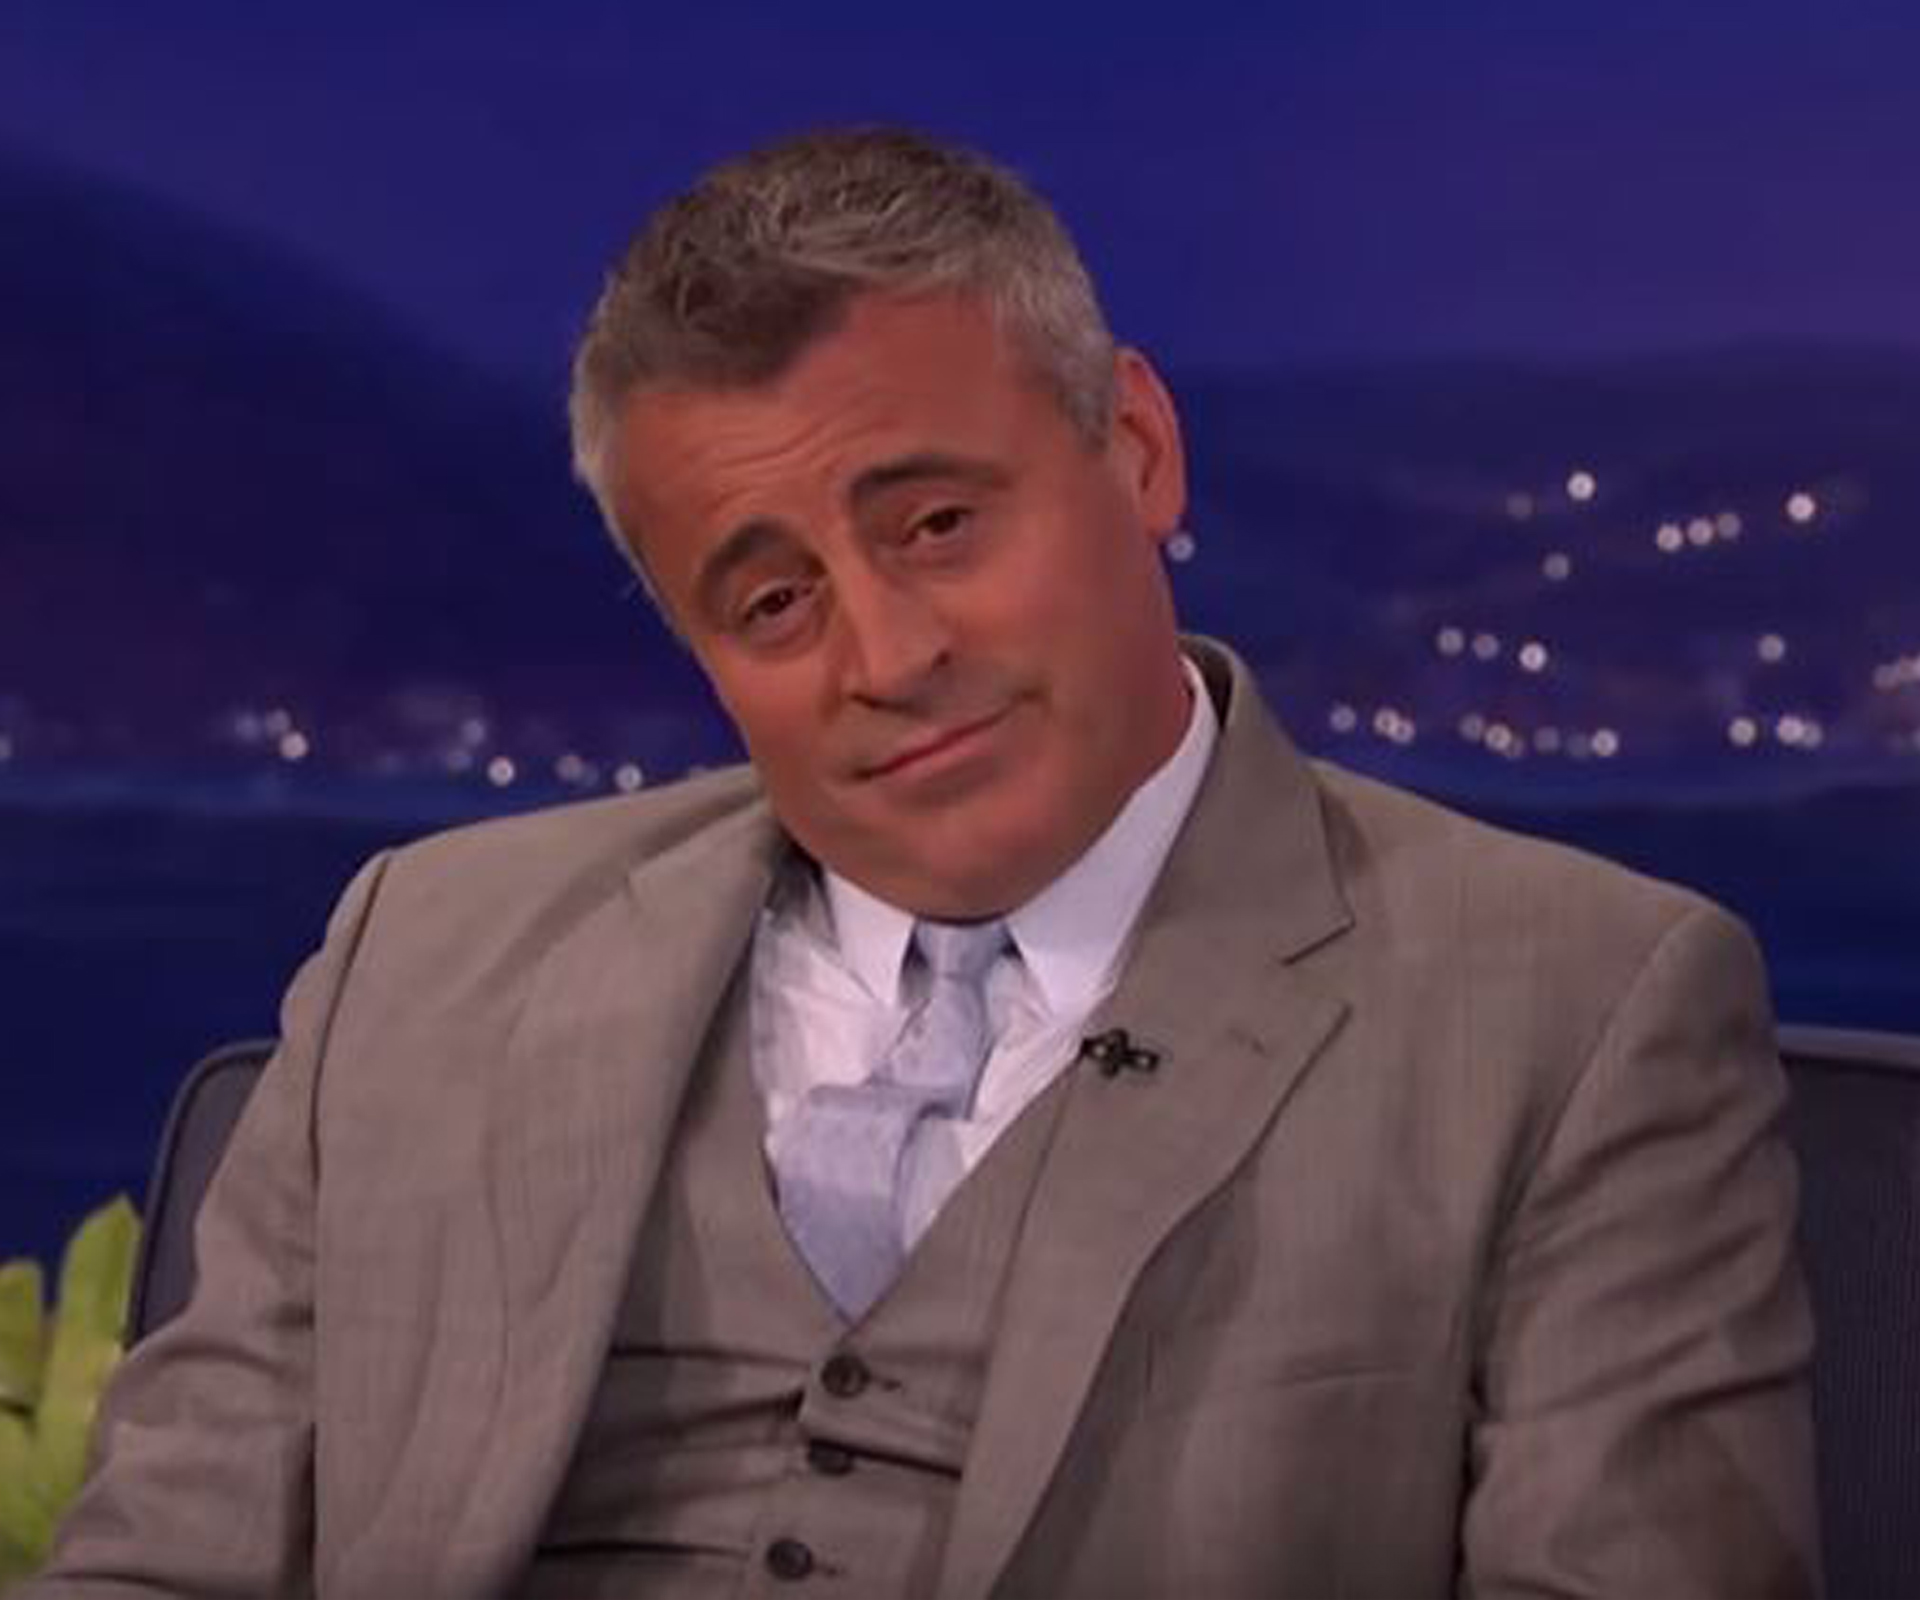 WATCH: Friends star explains he didn’t tell Prince William and Prince Harry to ‘f*** off’